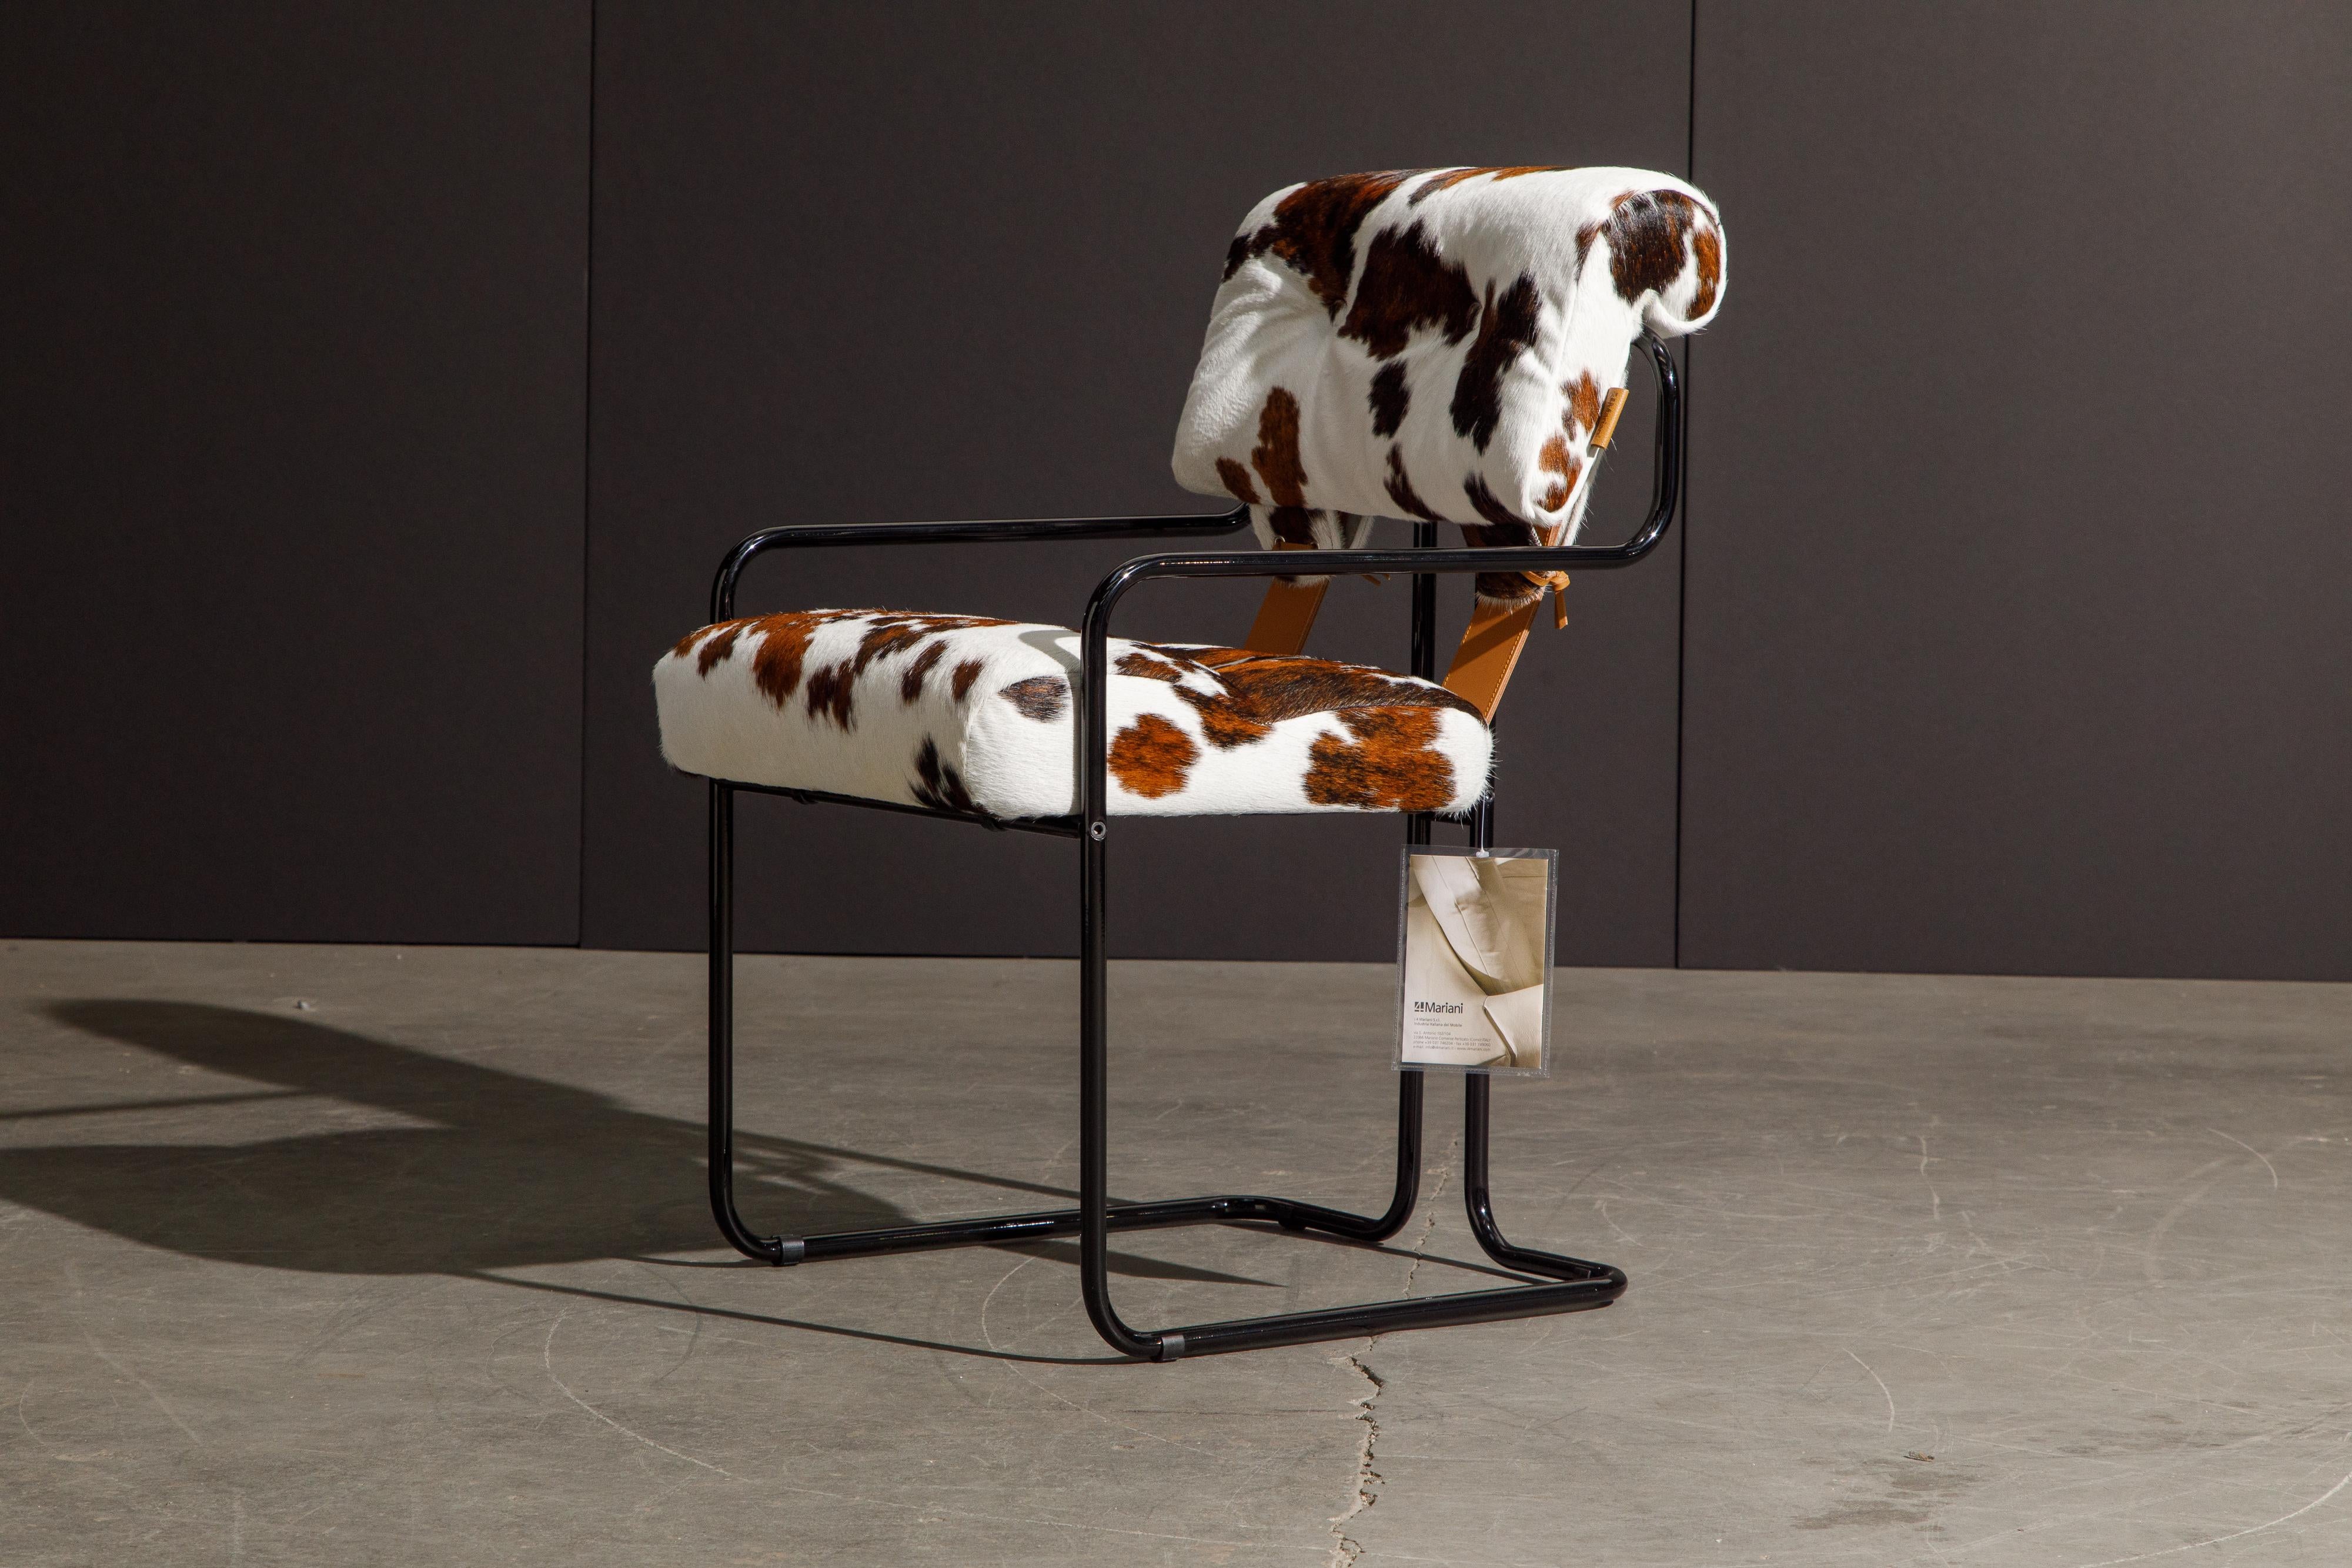 Currently, the most coveted dining chairs by interior designers are 'Tucroma' chairs by Guido Faleschini for i4 Mariani, and we have this incredible pair (2) of Tucroma armchairs in beautiful spotted brown and white cowhide leather with black